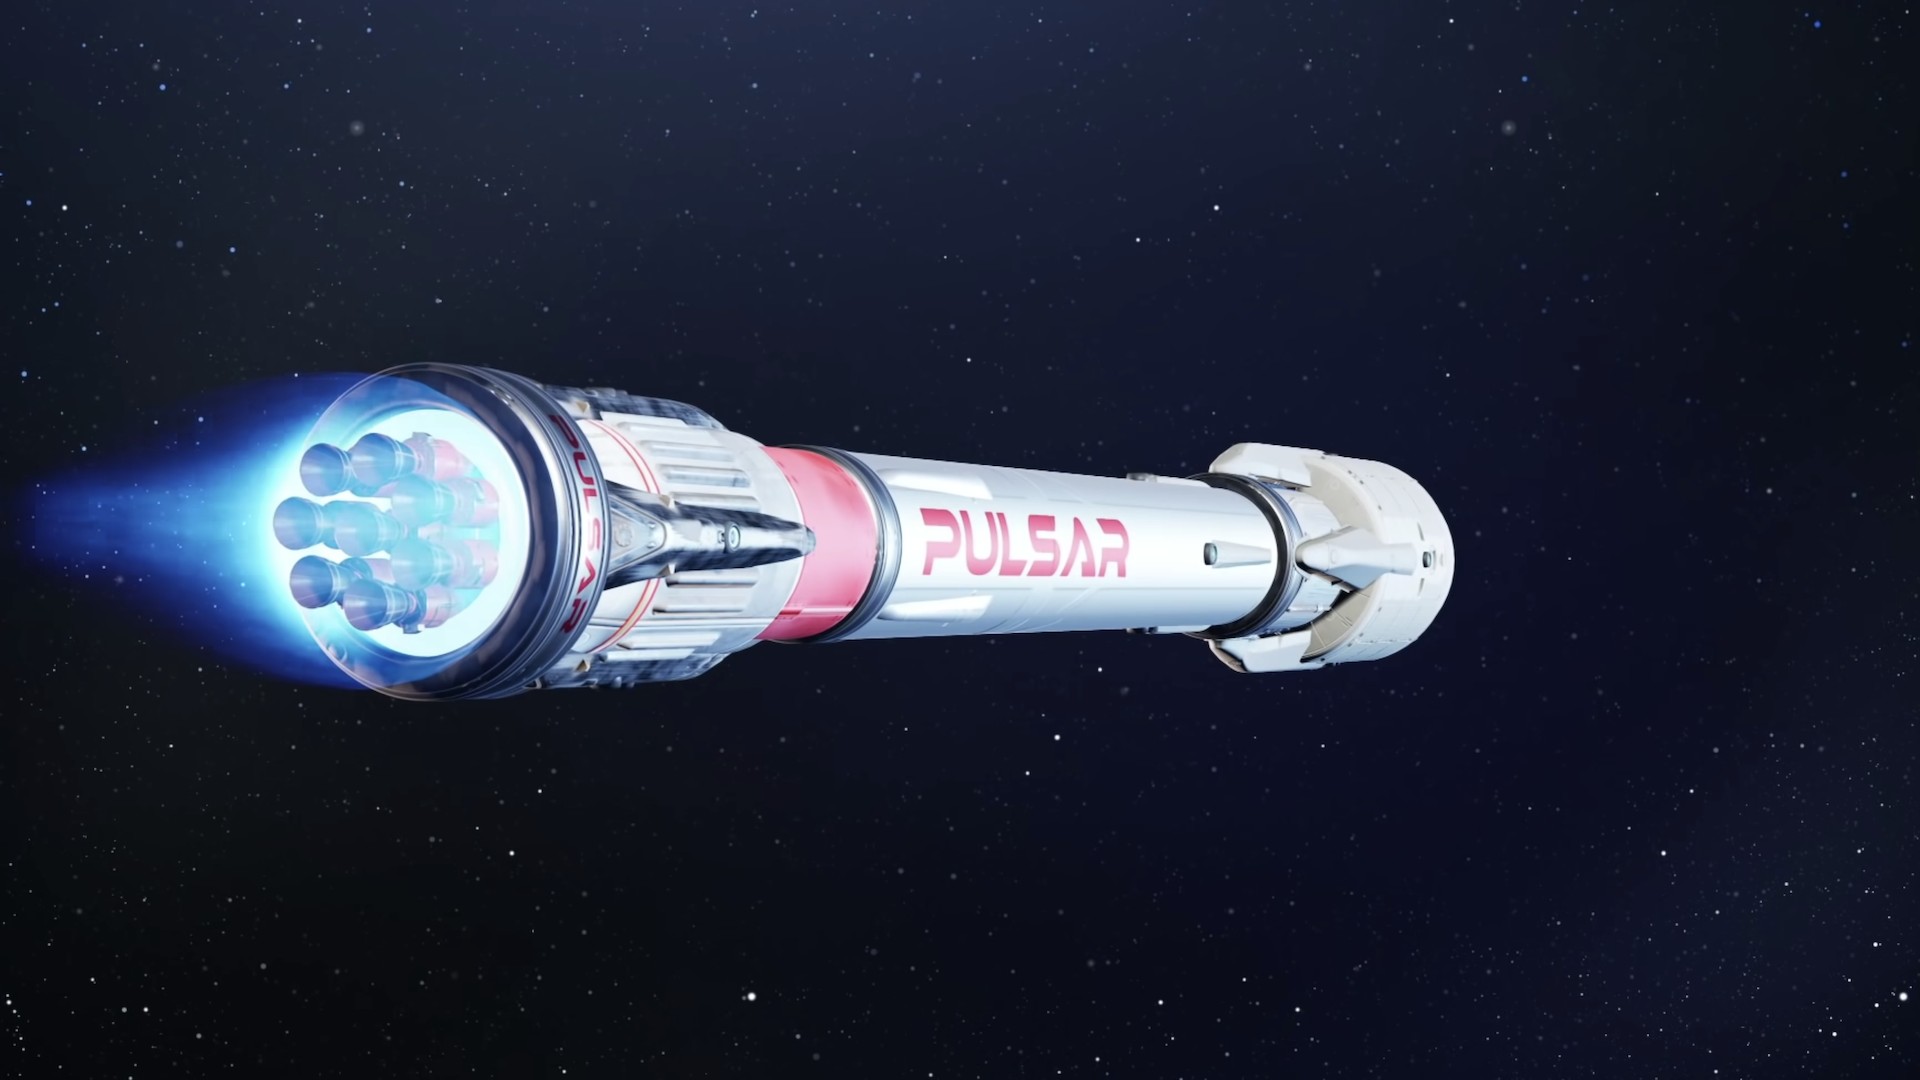 Pulsar Fusion Wants to Build the World's First Nuclear Fusion Rocket Engine, is it Legit?